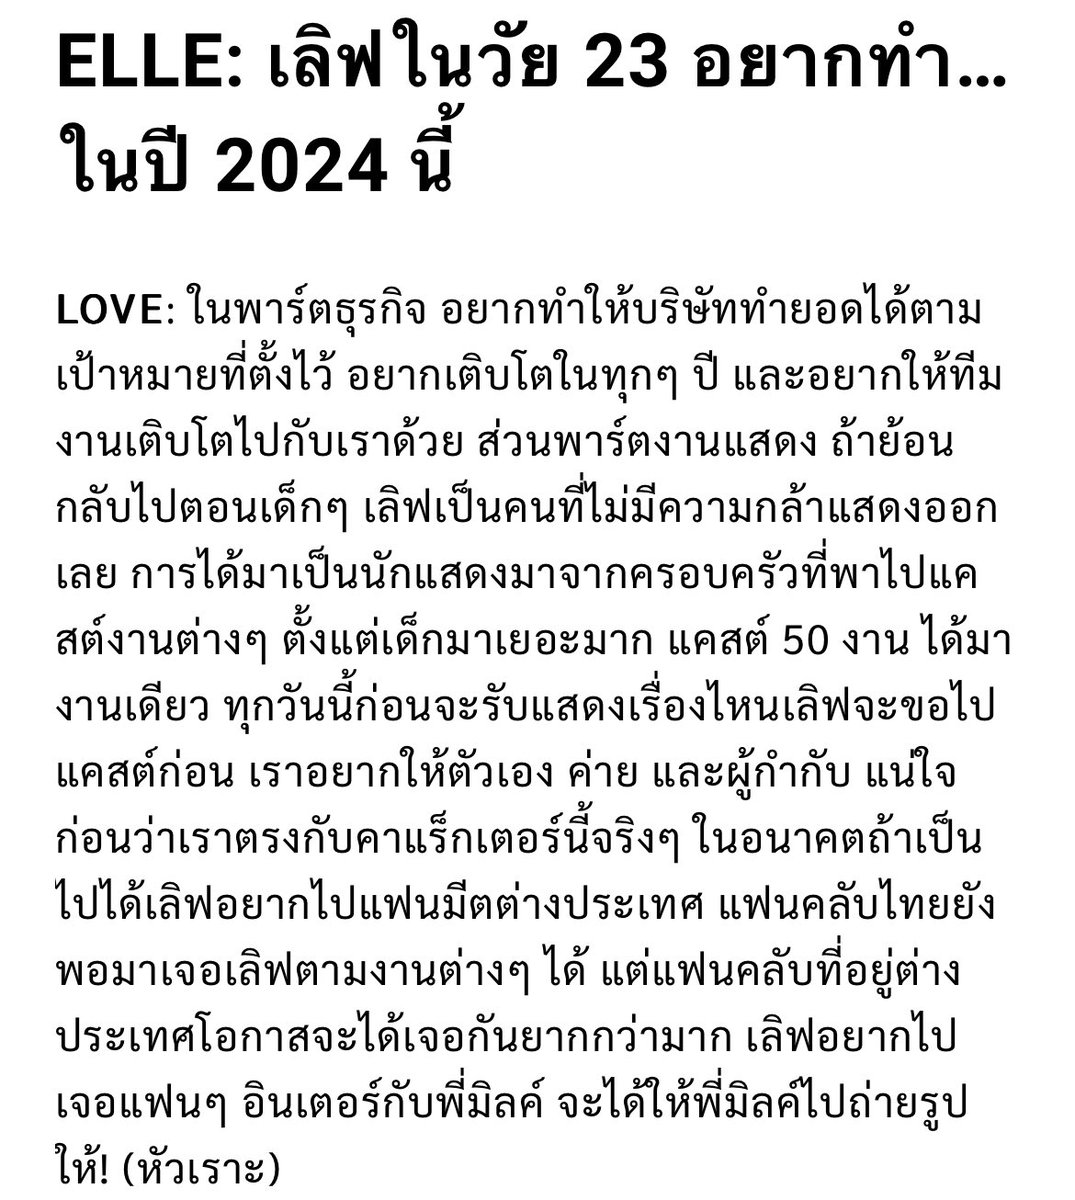 [EN Trans] #ELLEThailand #loverrukk #มิ้ลค์เลิฟ #MilkLove 

ELLE: To-do list/Plan in 2024

Love: In the business part, I want my brand to achieve the sales target, and grow every year. (Actor part) In the future, if it’s possible I would like to go fan meetings overseas. Thai…